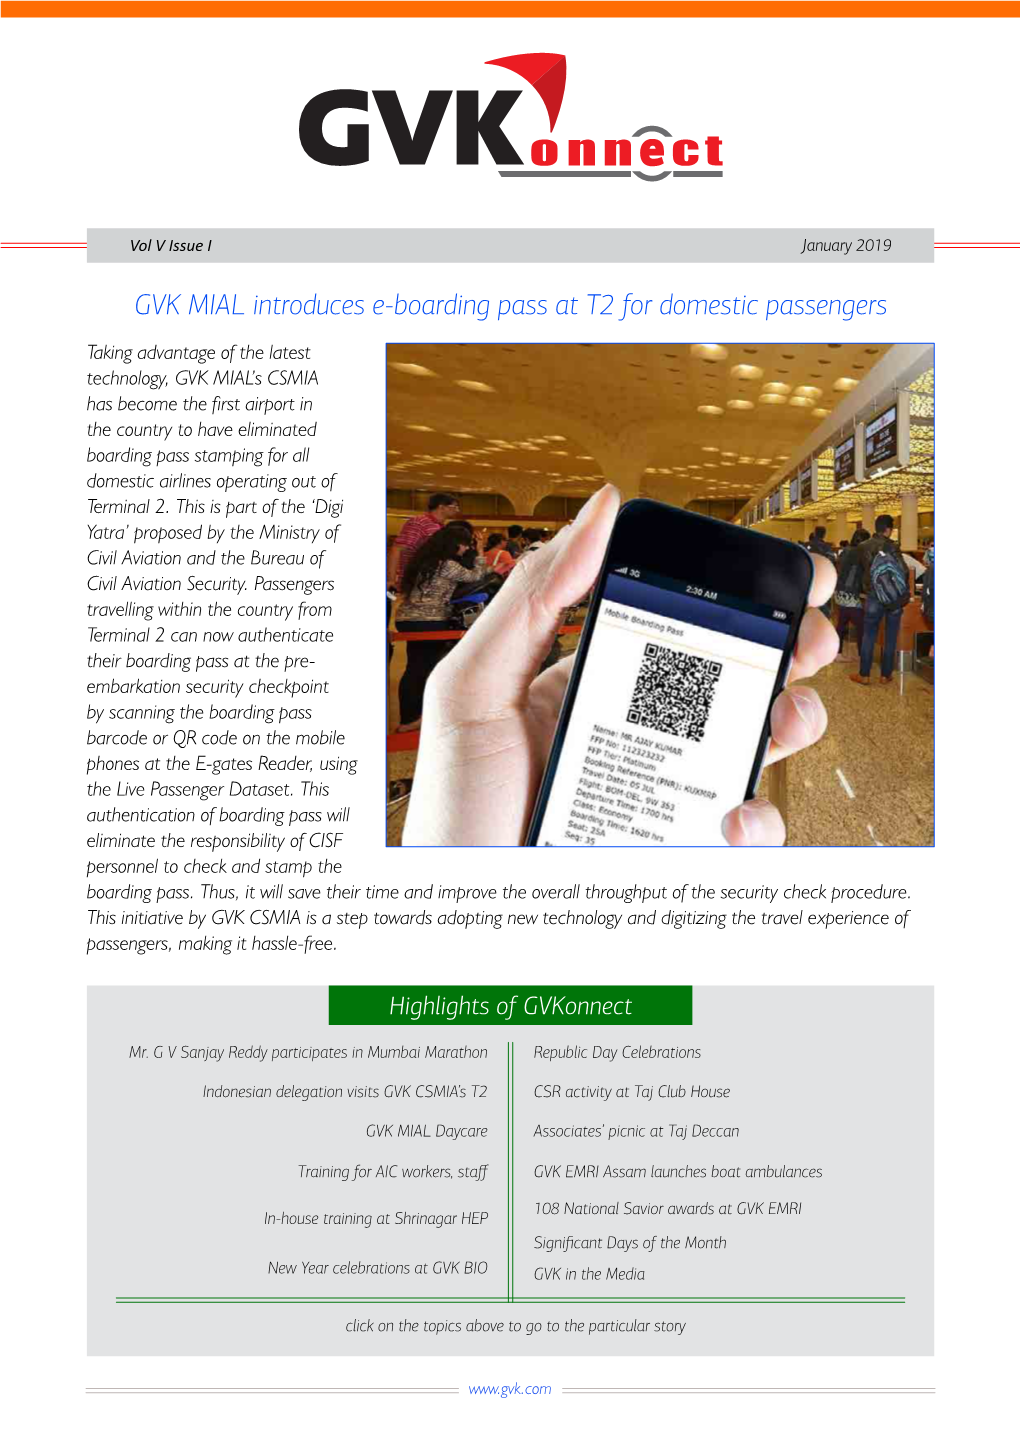 GVK MIAL Introduces E-Boarding Pass at T2 for Domestic Passengers